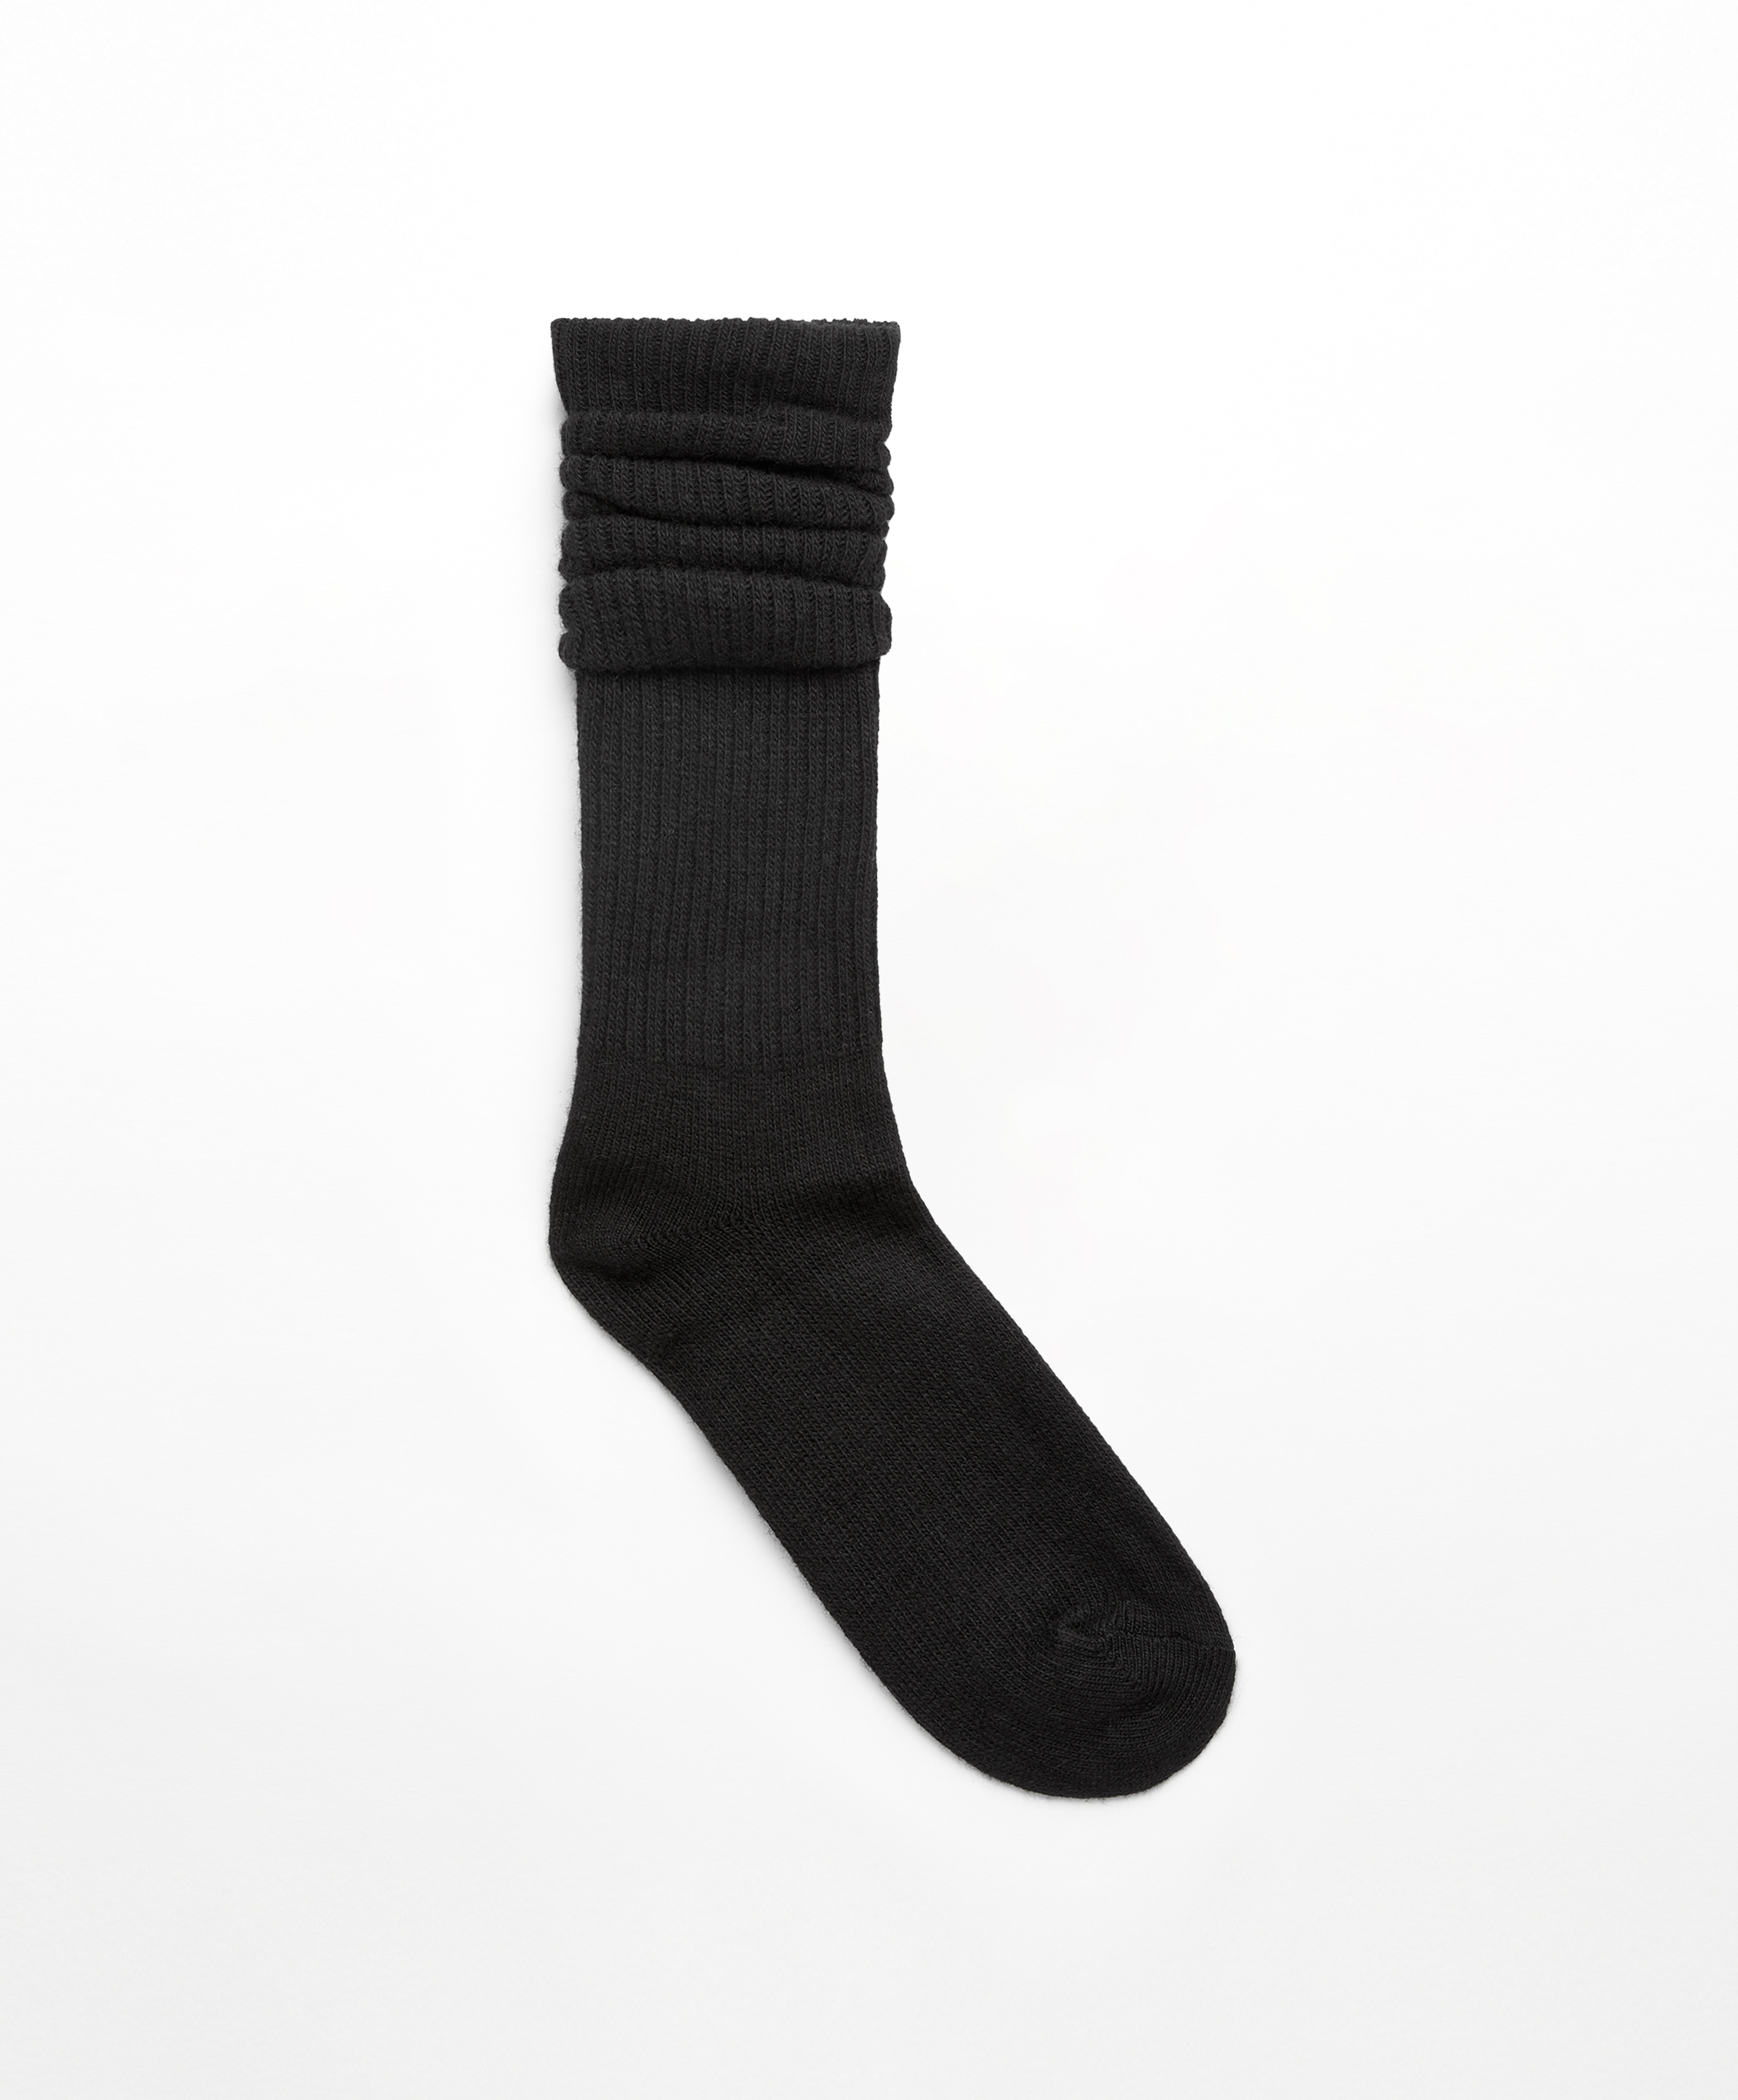 Long socks with 29% wool and 5% cashmere